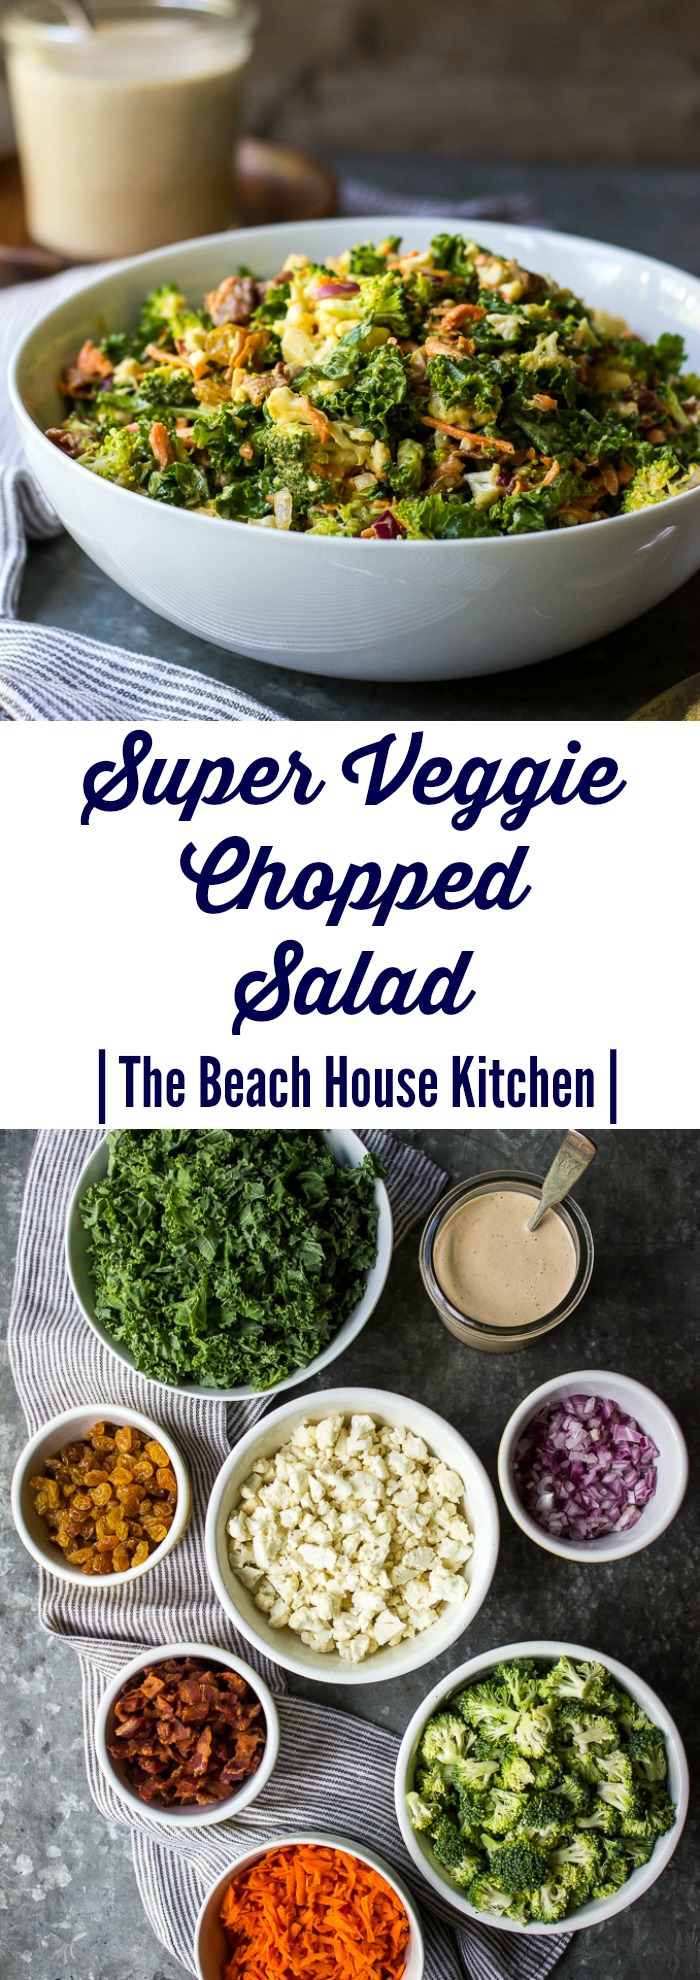 Super Veggie Chopped Salad with BBQ Ranch Dressing